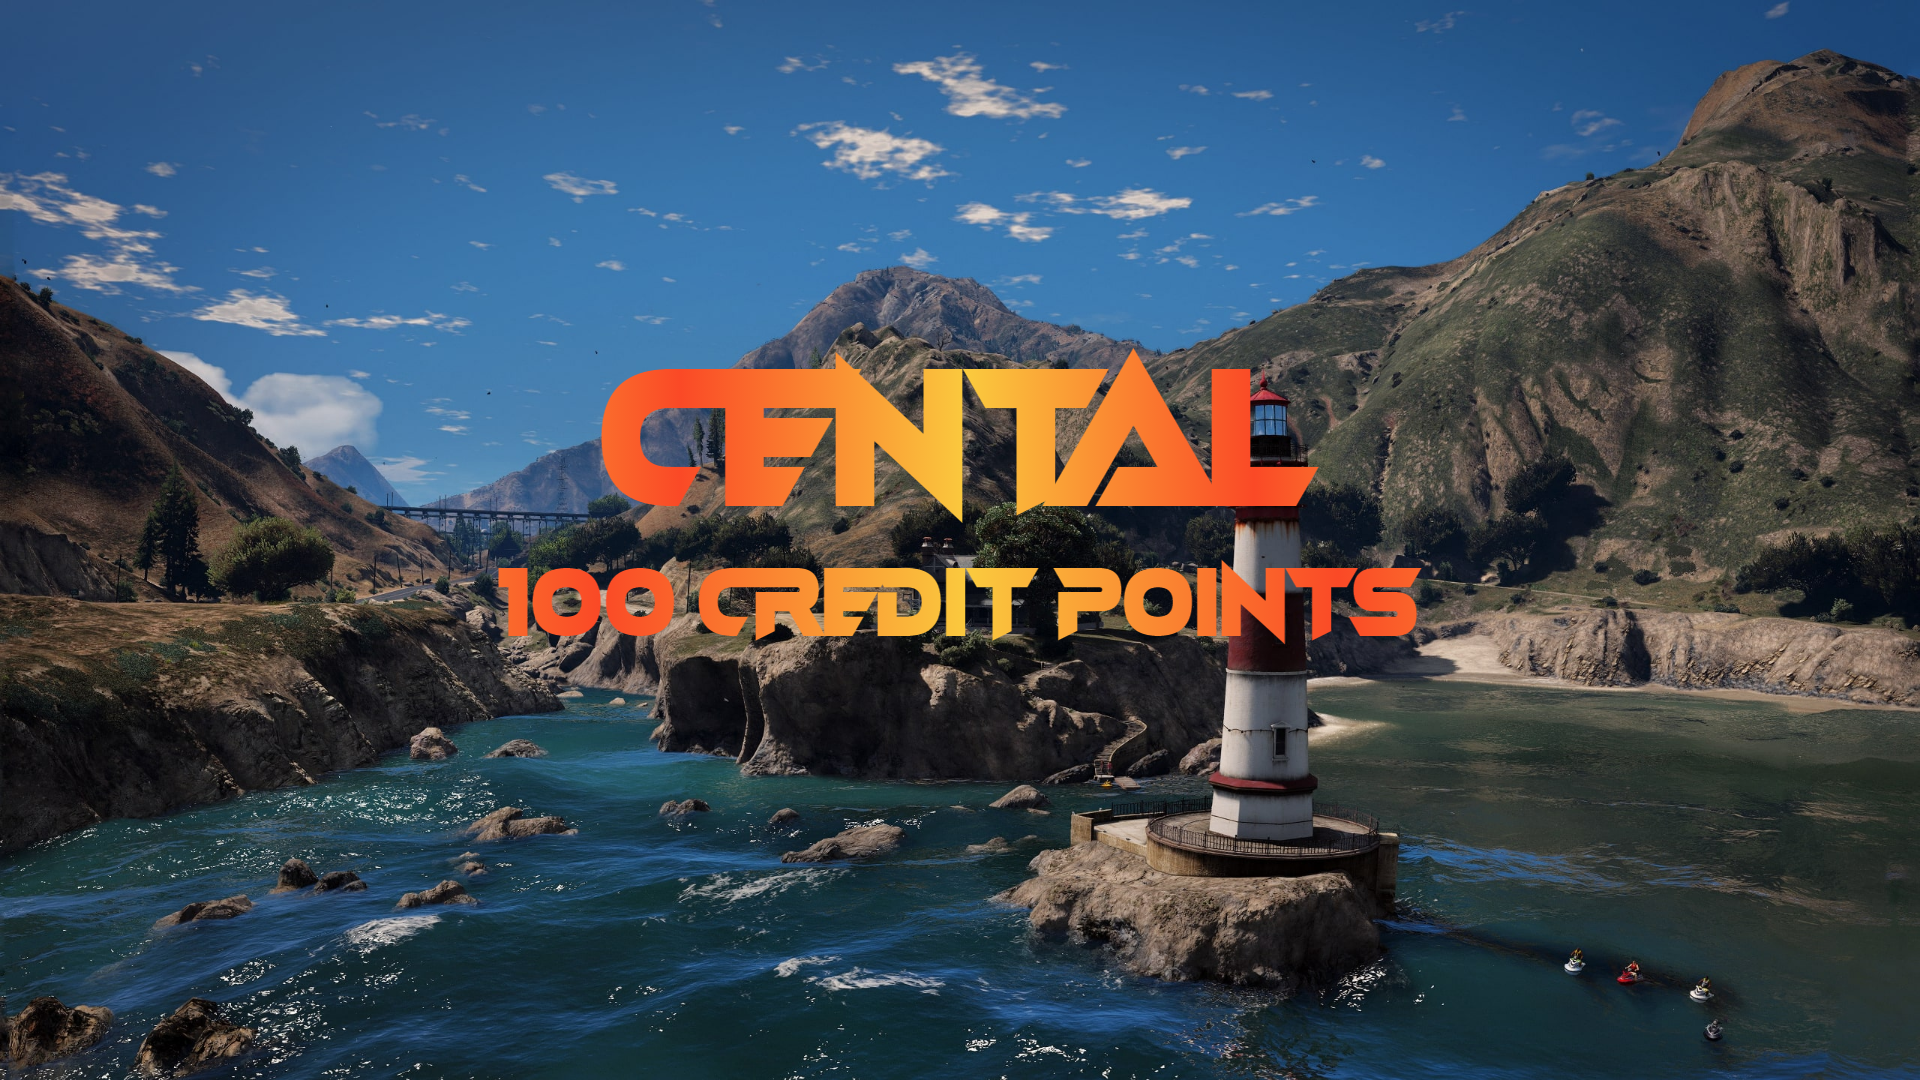 CentralRP - 100 Credit Points Gift Card, $11.29